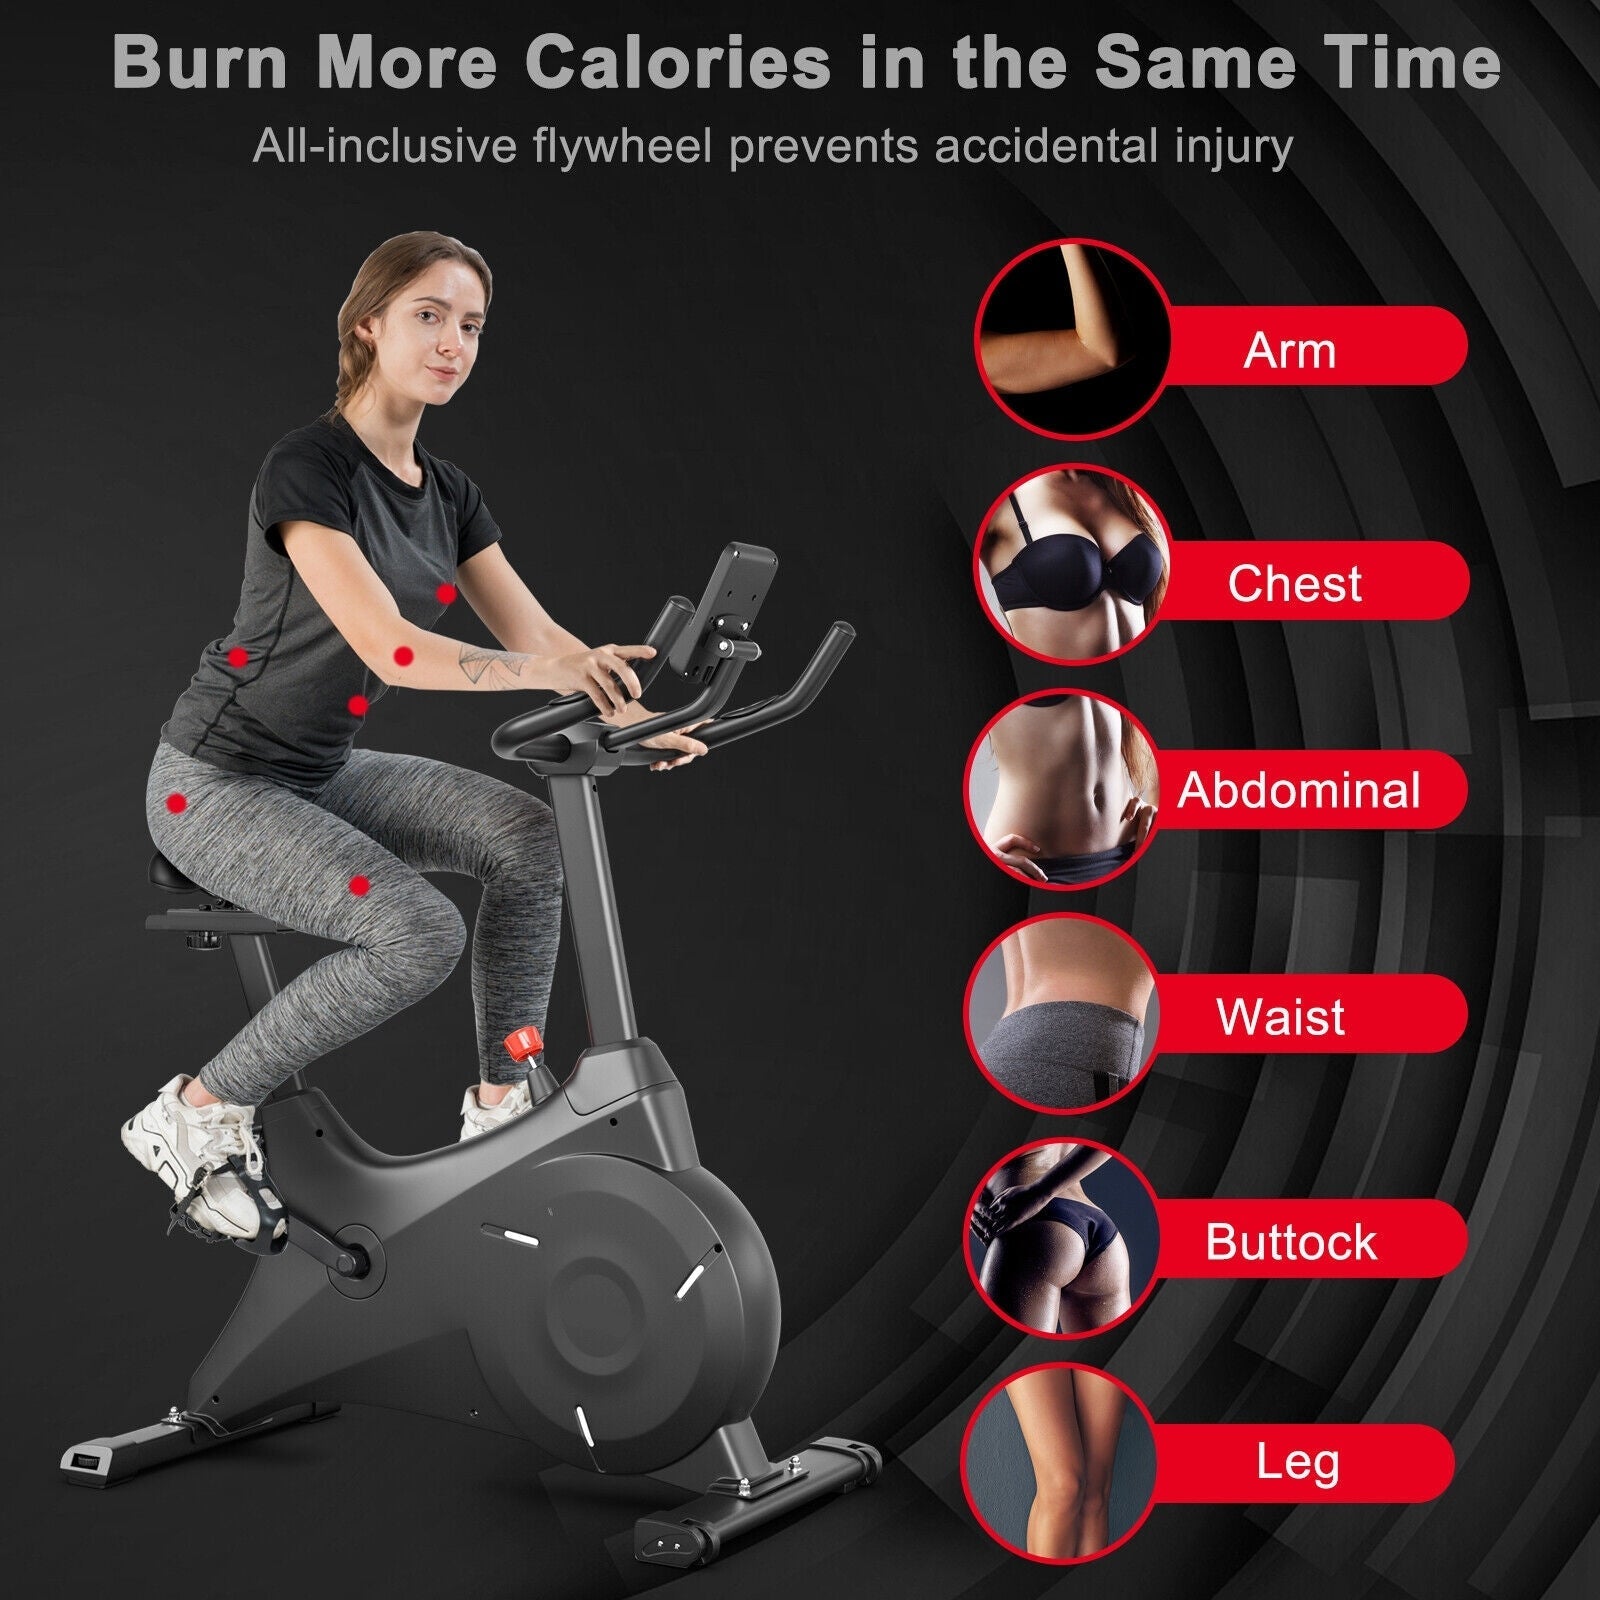 Magnetic Resistance Stationary Bike for Home Gym at Gallery Canada